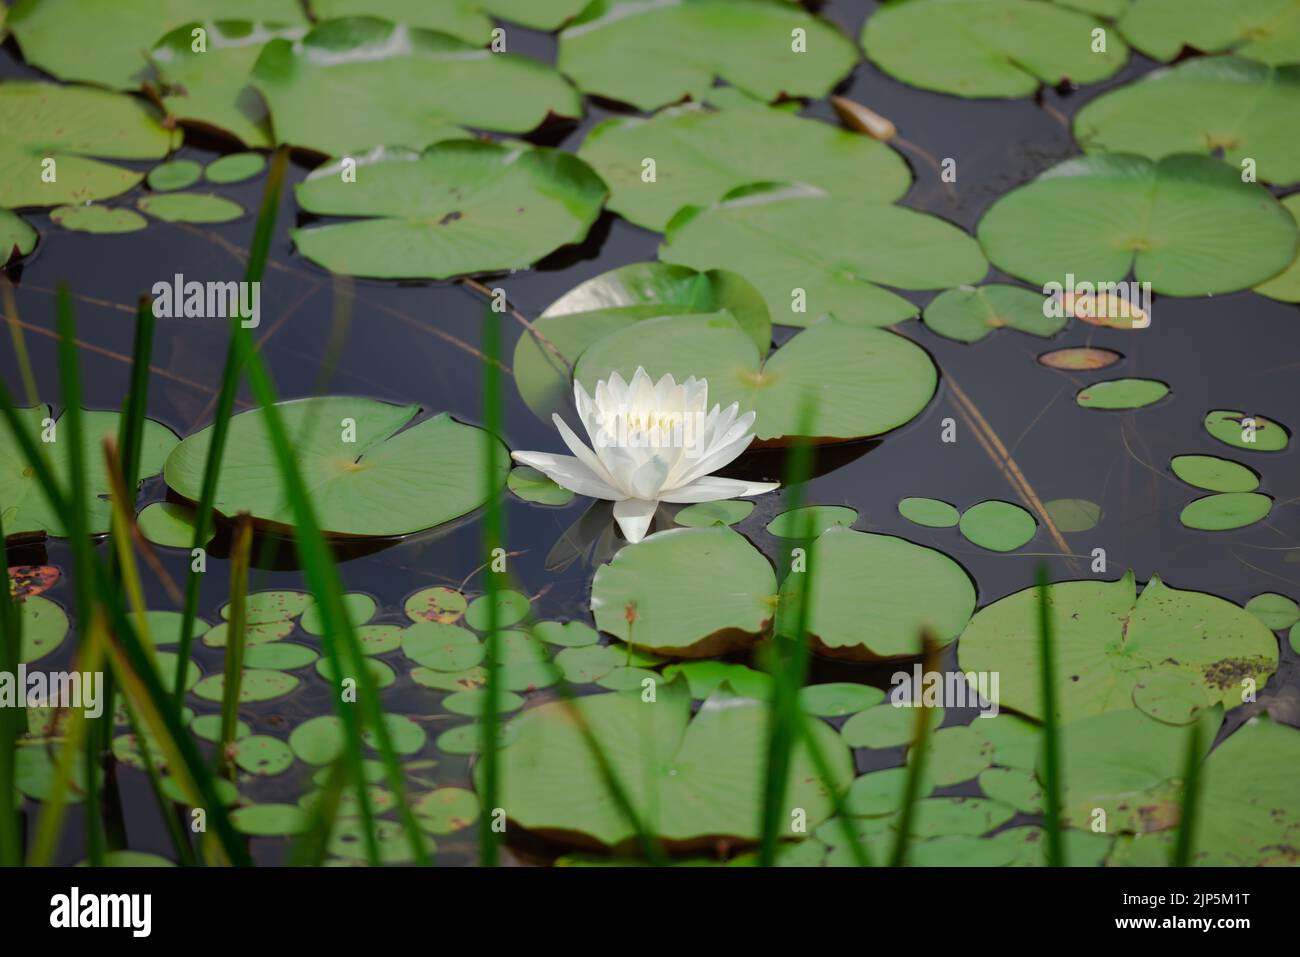 A beautiful lotus flower floating in a lake with green pads Stock Photo